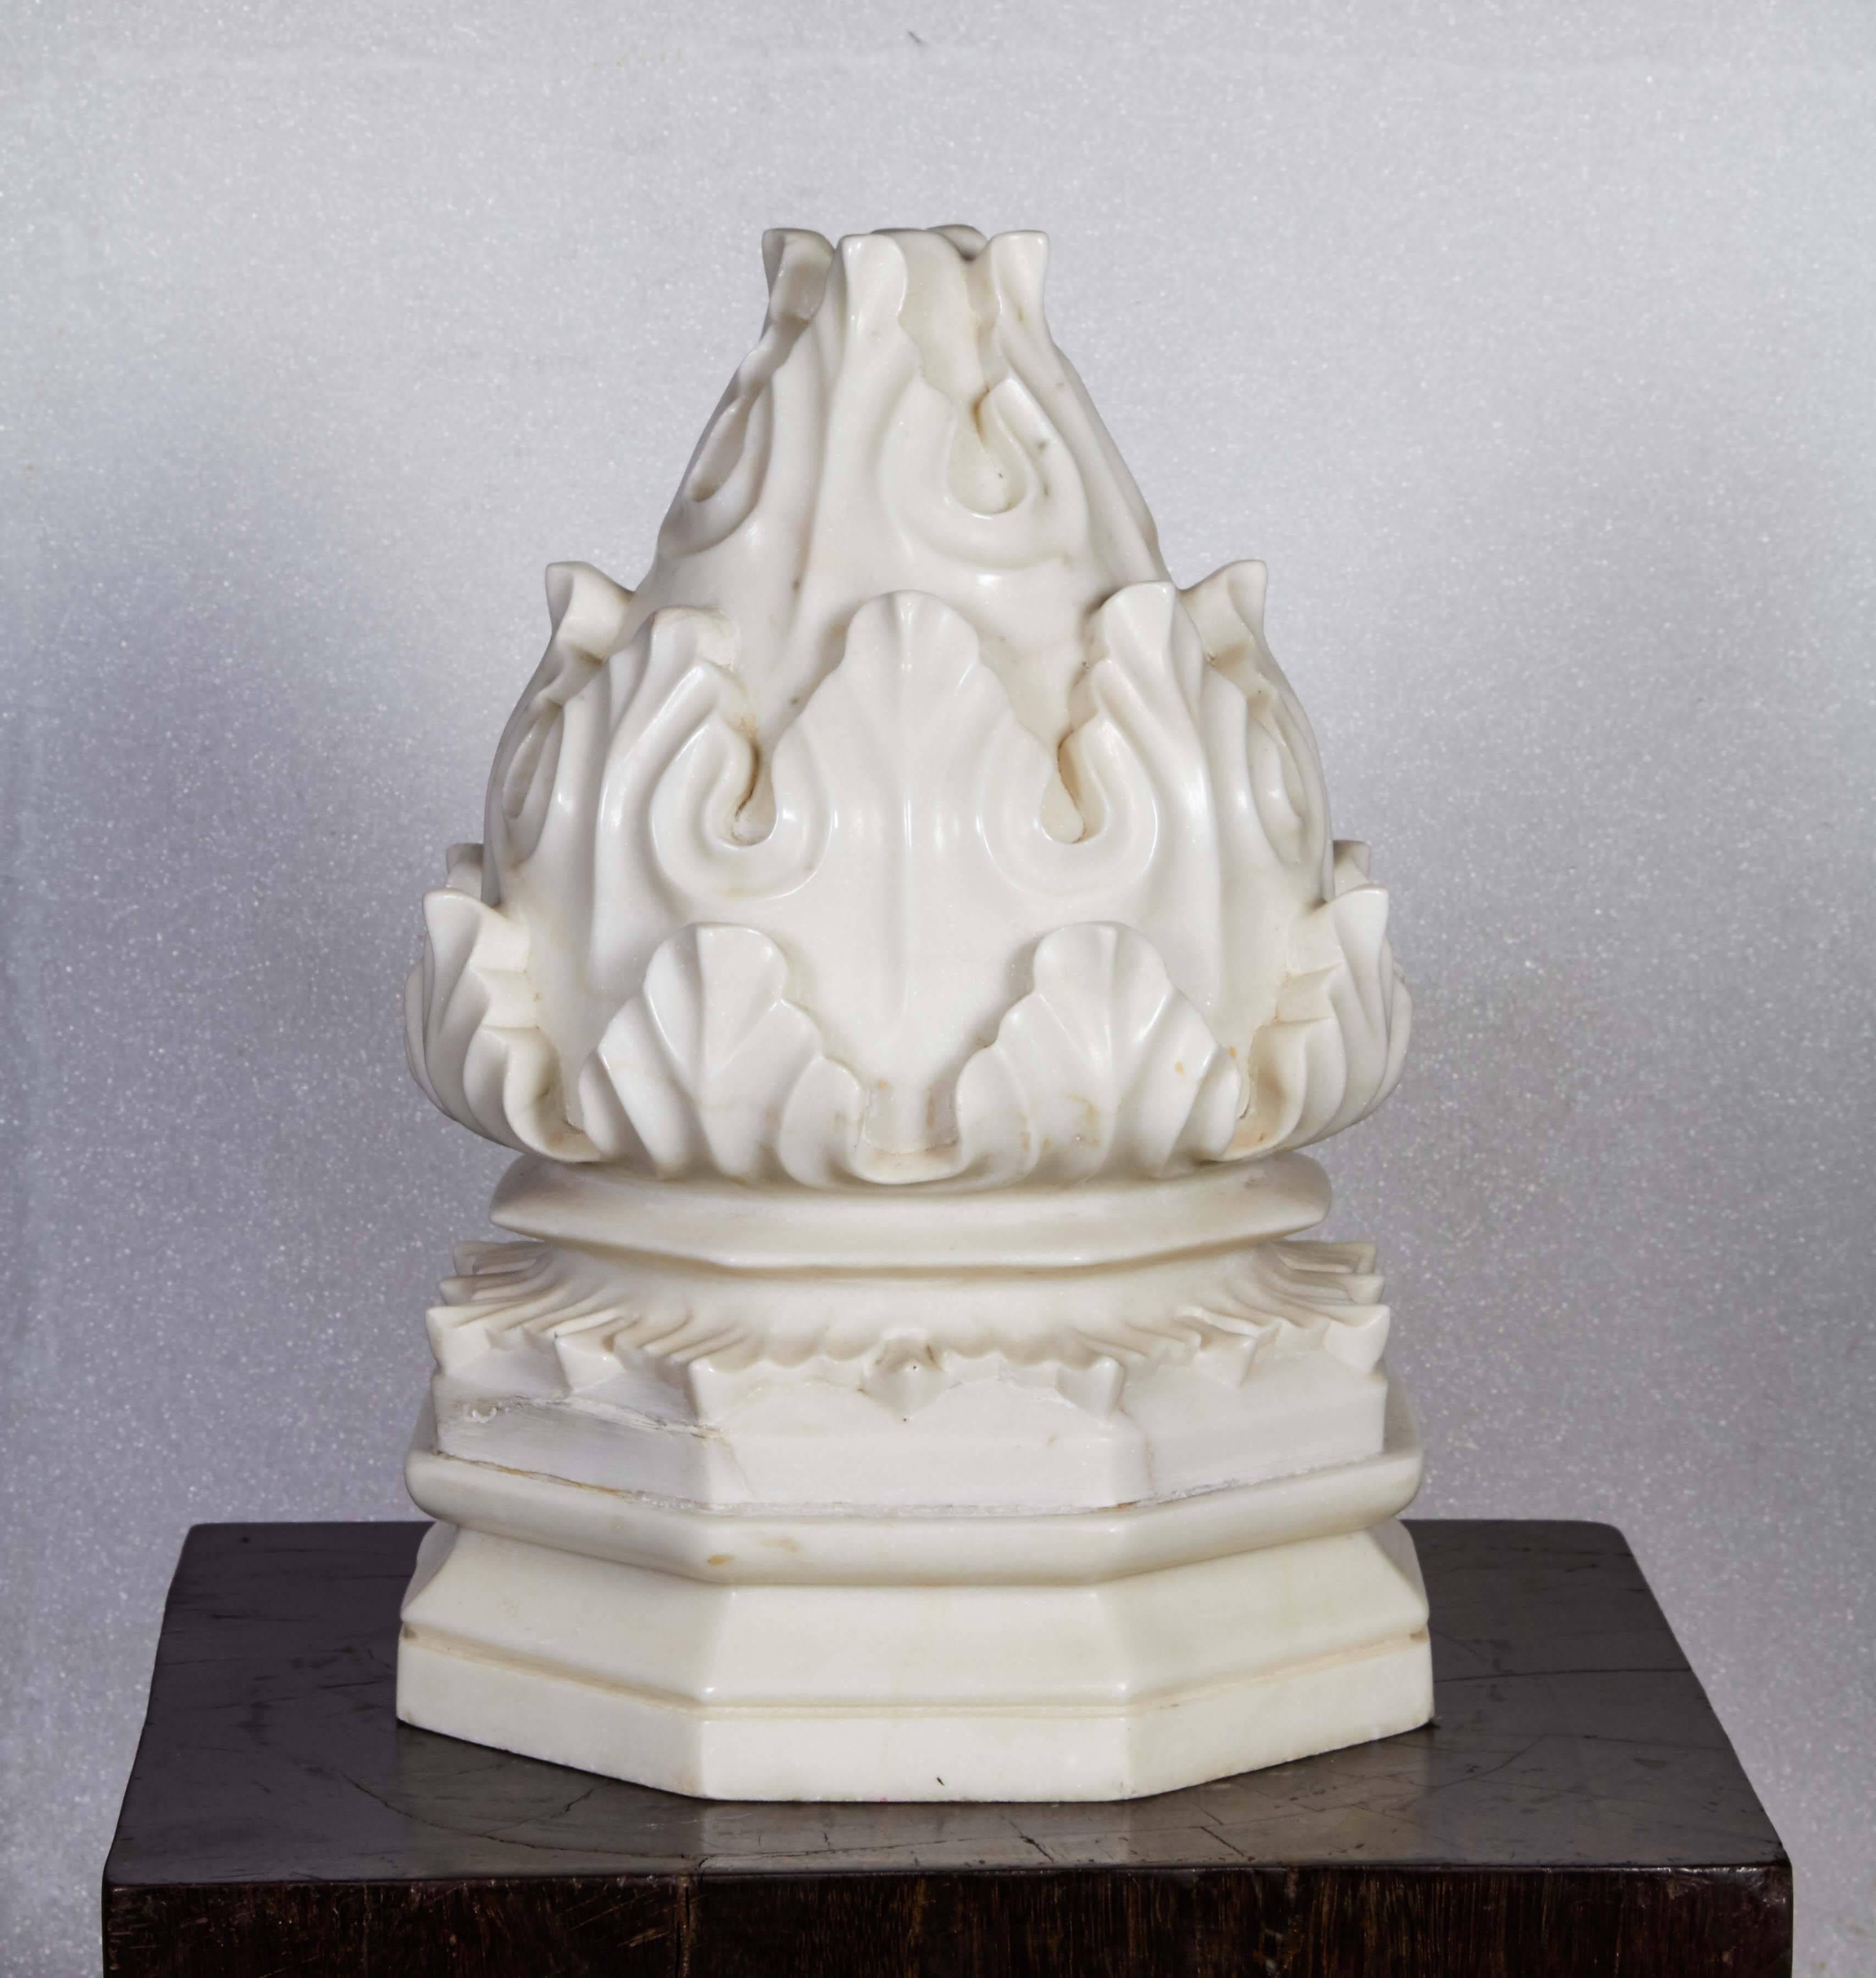 A large carved white marble carpet weight from India, with a traditional flame carving on an octagonal base. For the table, shelf or floor. Also makes a singular decorative element for patios, gardens or decks. 